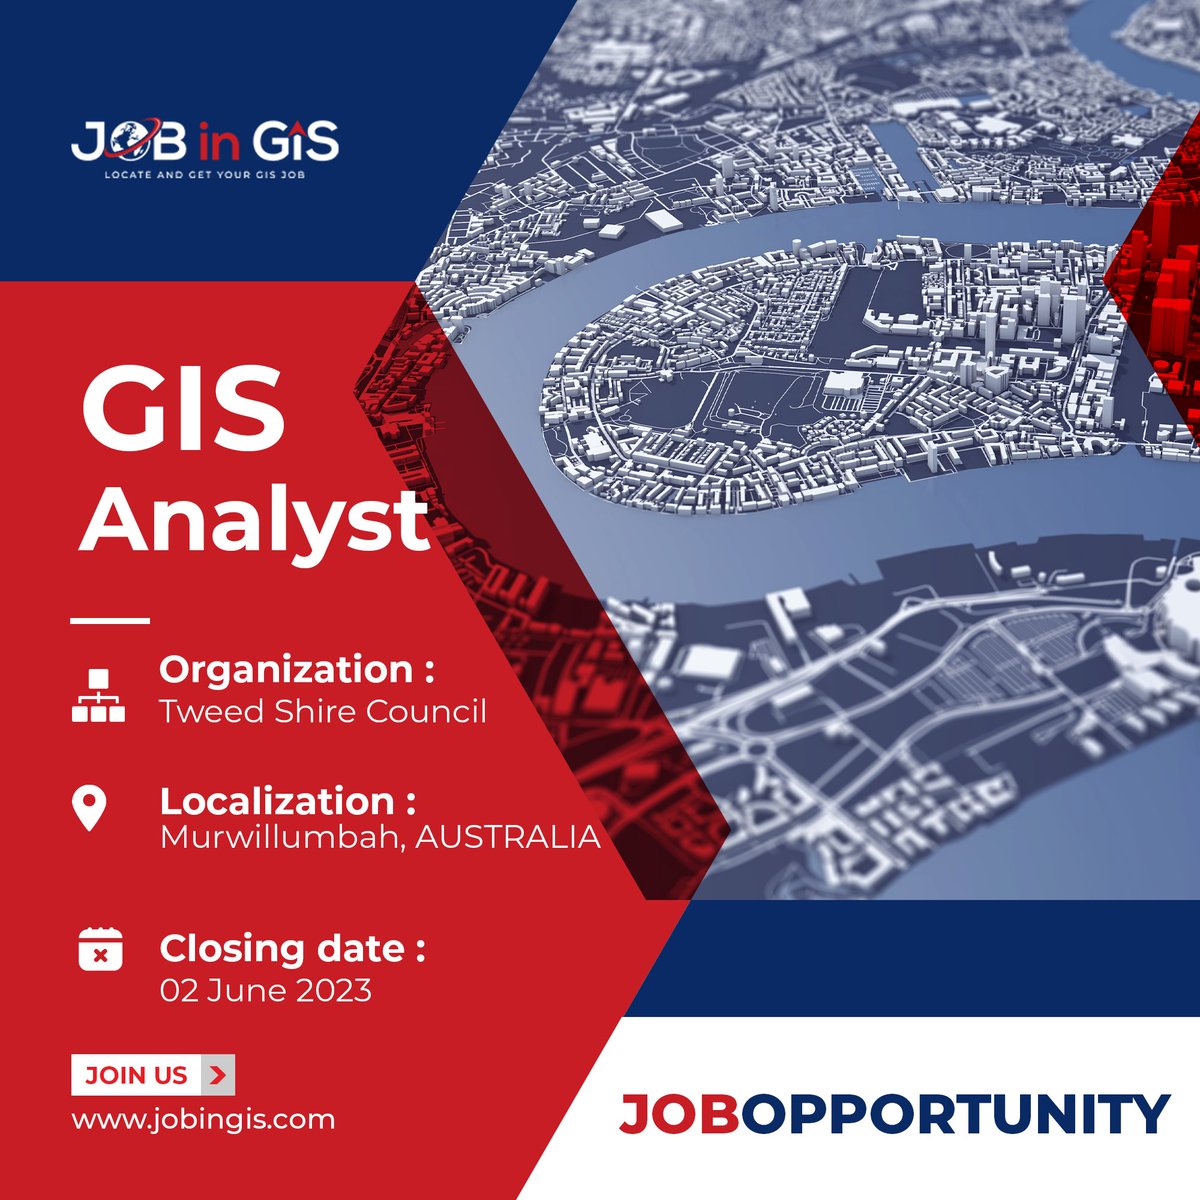 #jobingis : Tweed Shire Council is hiring a GIS Analyst
📍Location : #Murwillumbah, #AUSTRALIA
💰Salary : $75,686 to $89,651

Apply here 👉 : jobingis.com/jobs/gis-analy…

#Jobs #jobsearch #cartography #Geography #mapping #GIS #geospatial #remotesensing #gisjobs #gischat